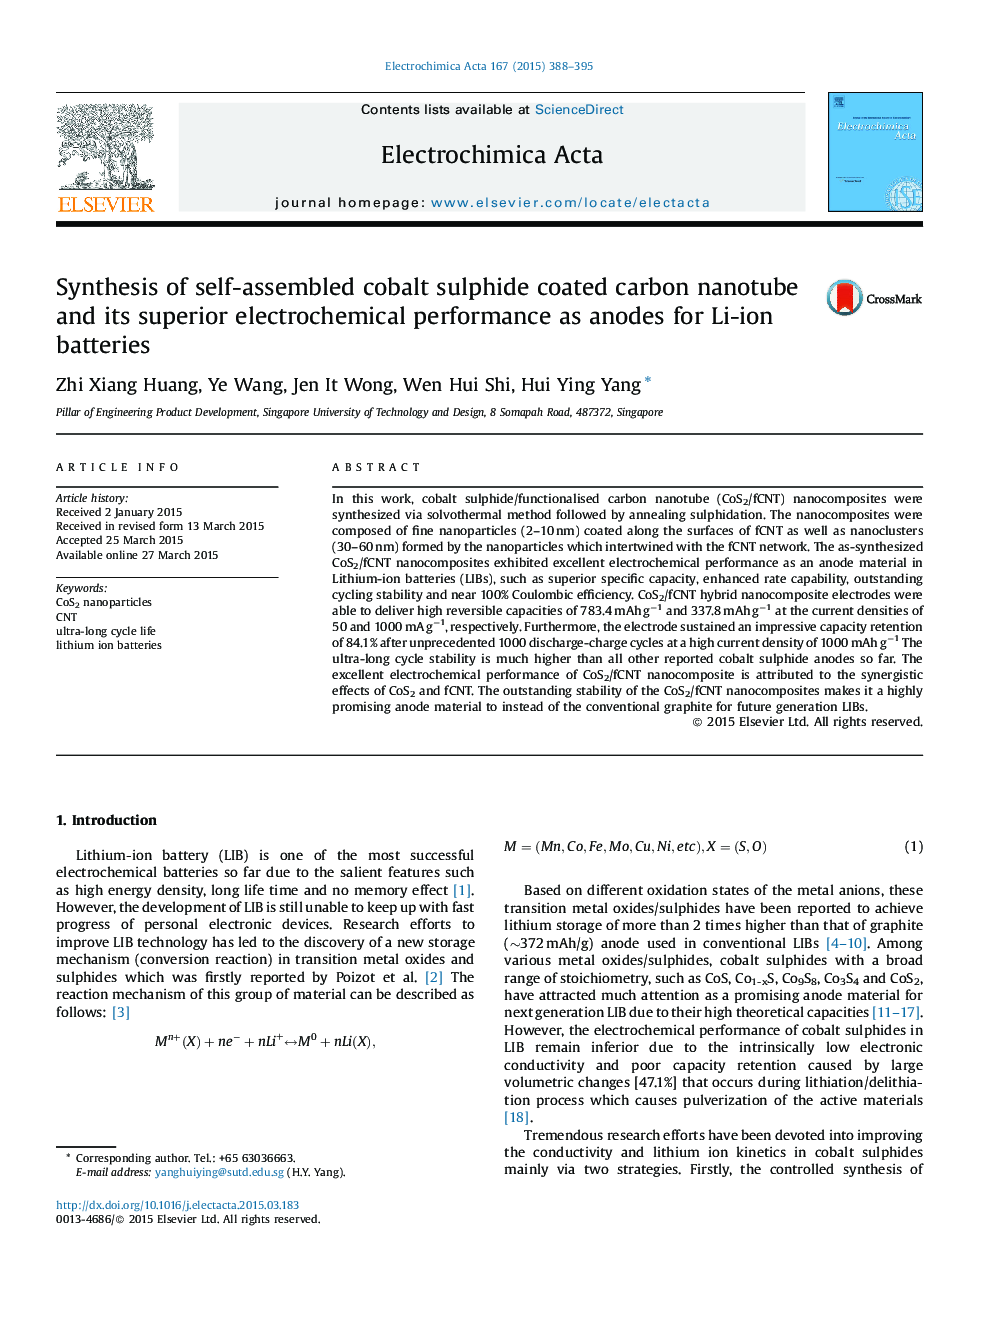 Synthesis of self-assembled cobalt sulphide coated carbon nanotube and its superior electrochemical performance as anodes for Li-ion batteries